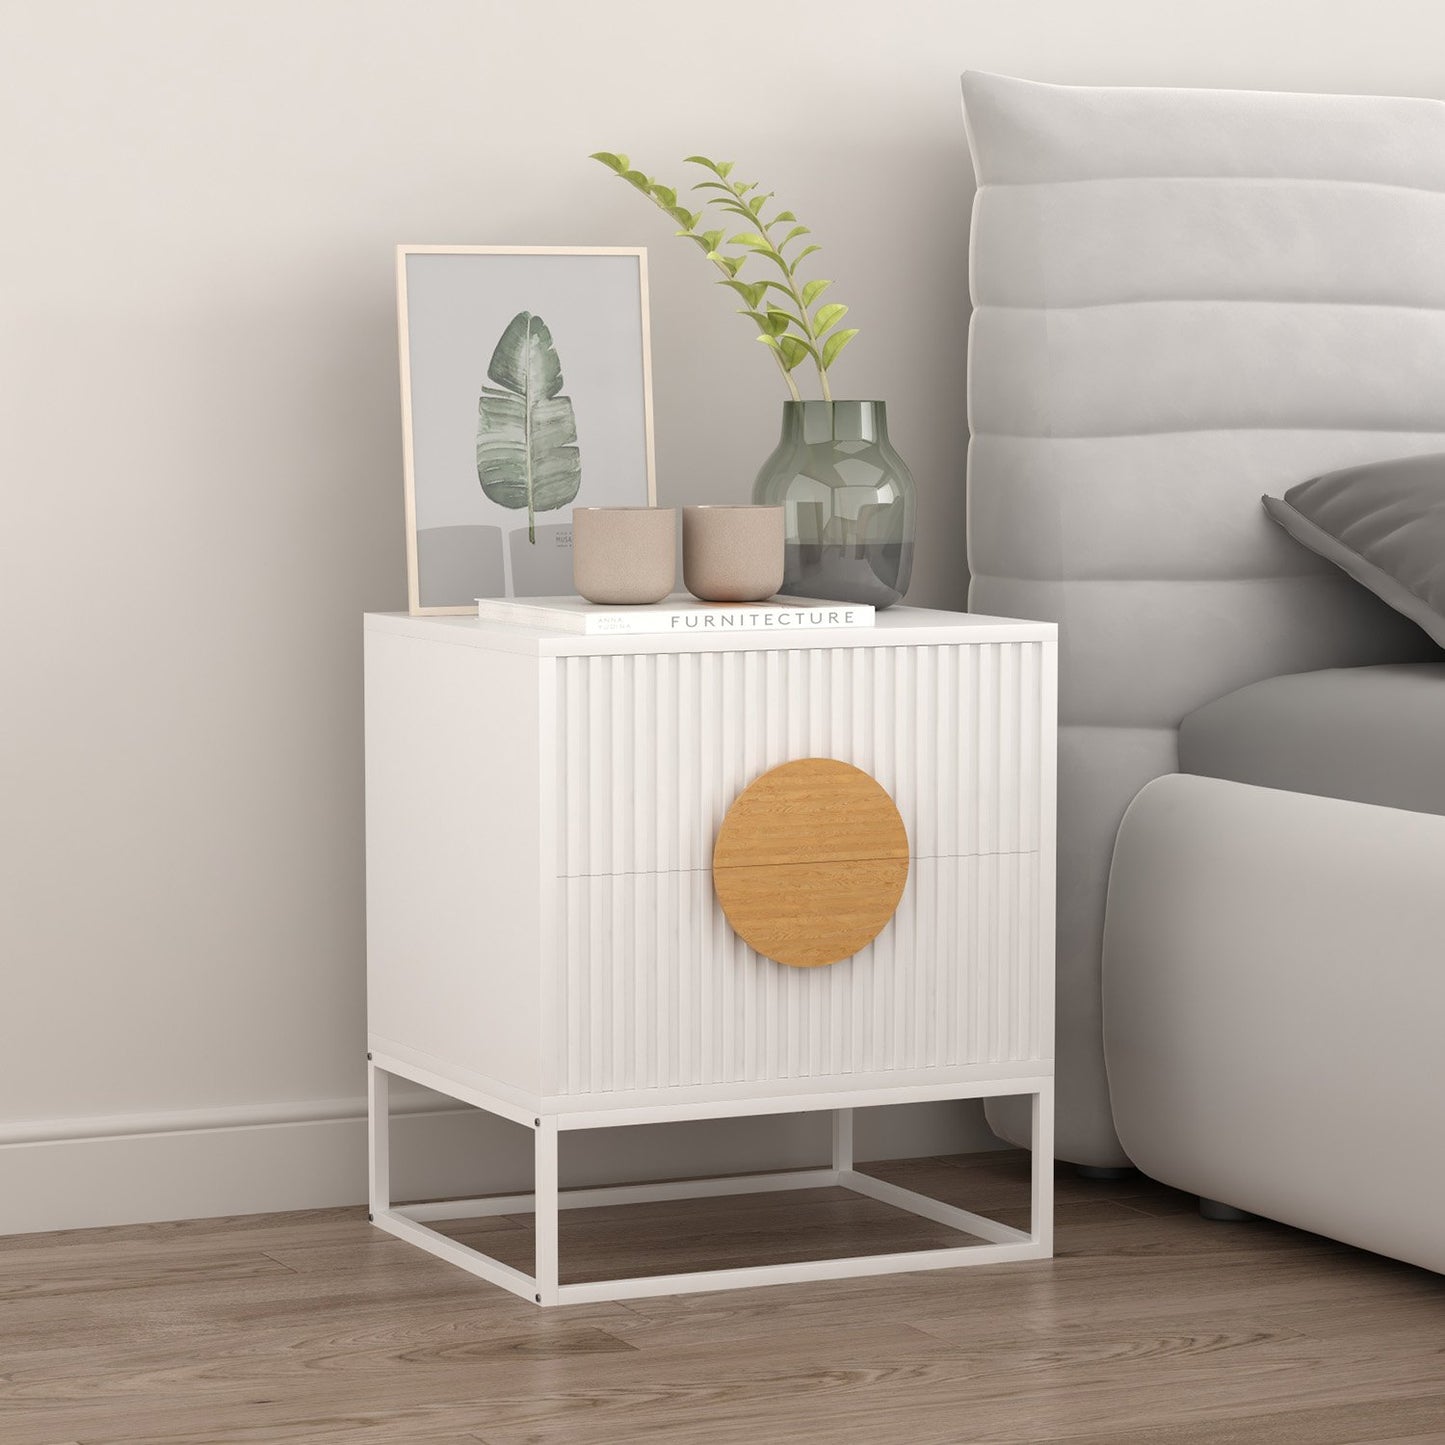 Sarantino Silvia Bedside Table with 2 Drawers - White